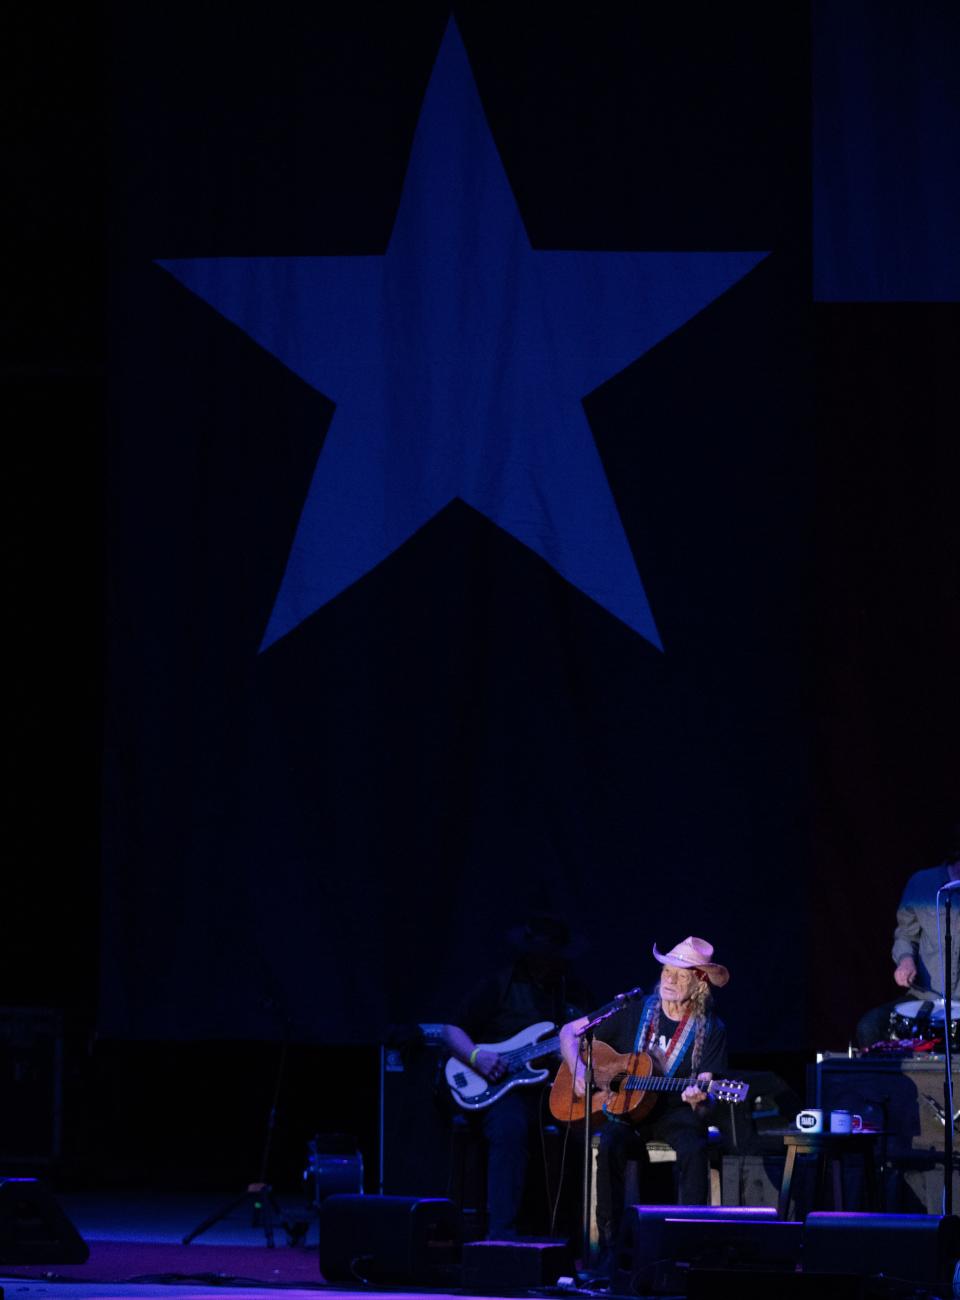 Legendary country musician Willie Nelson performs at the Tuscaloosa Amphitheater Friday, April 22, 2022, in Tuscaloosa, Alabama. Gary Cosby Jr./Tuscaloosa News